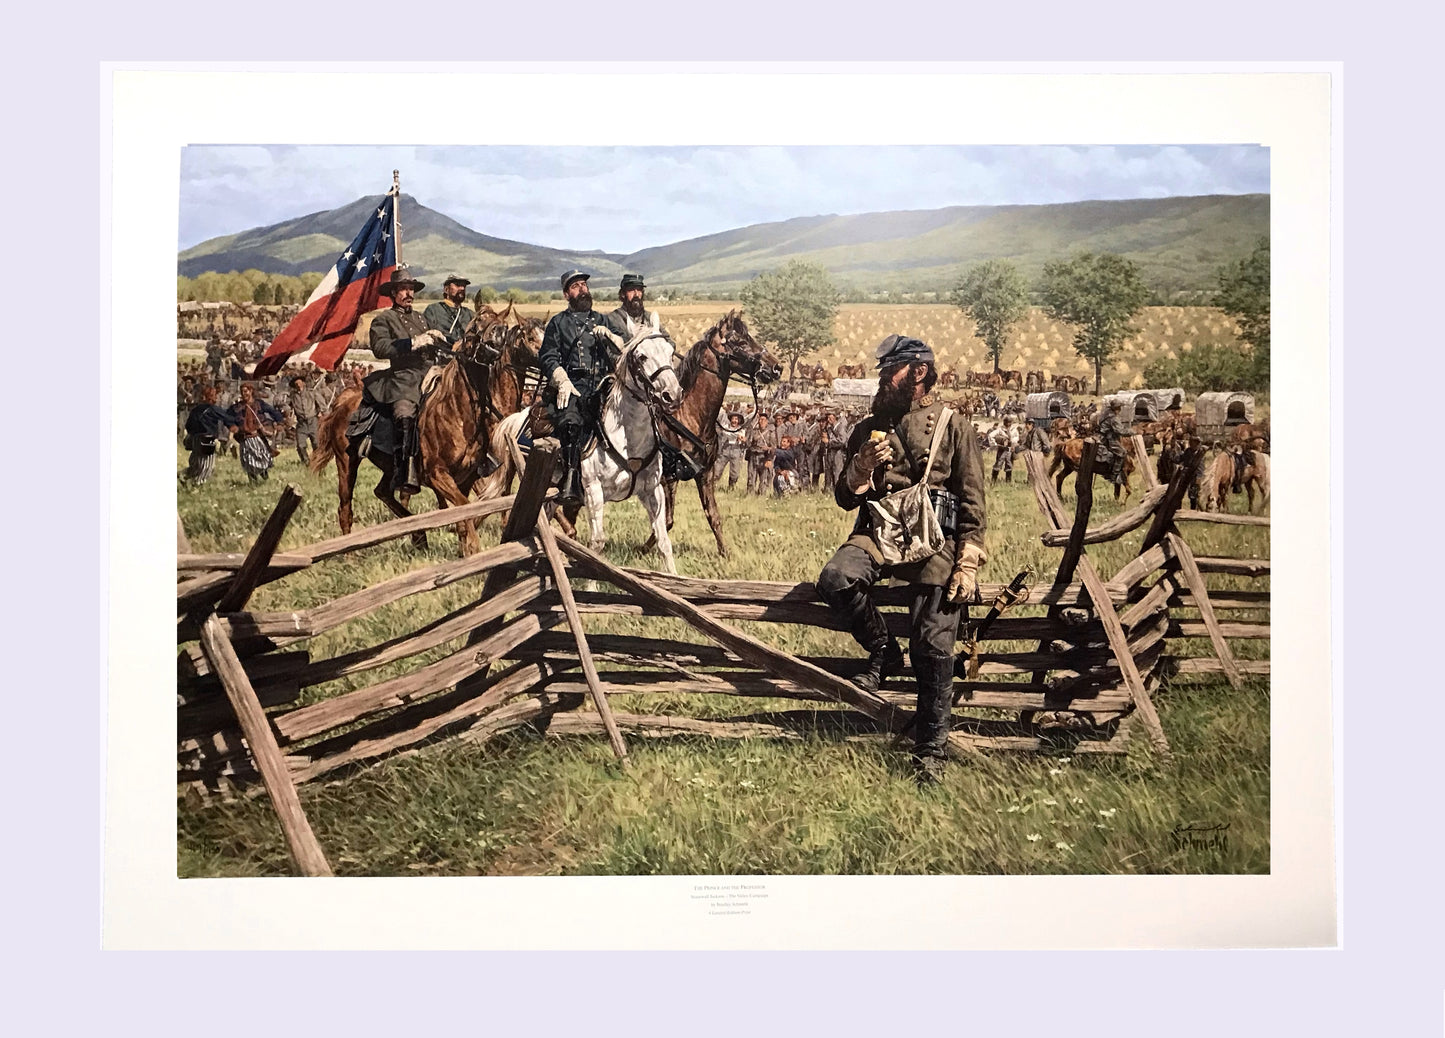 PRINCE AND THE PROFESSOR Limited Edition Civil War Print by Bradley Schmehl